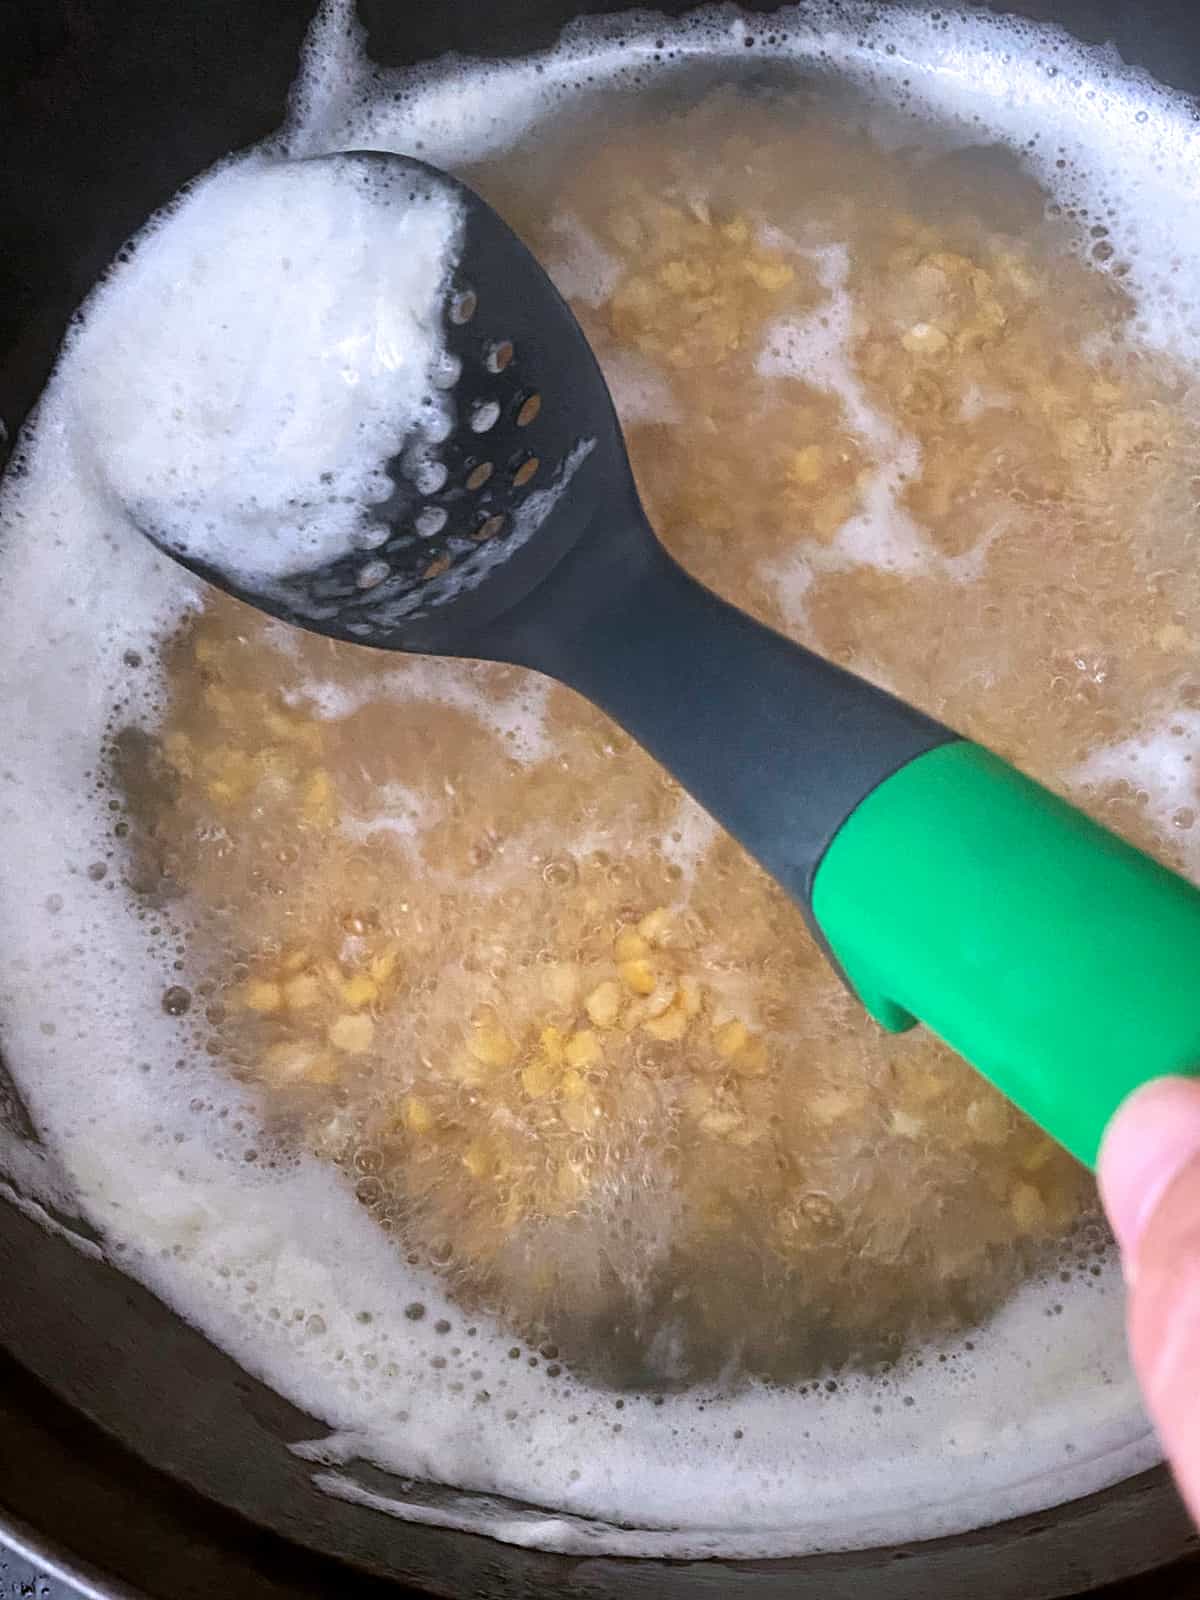 Yellow split peas boiling and a hand holding a spoon picks up foam.